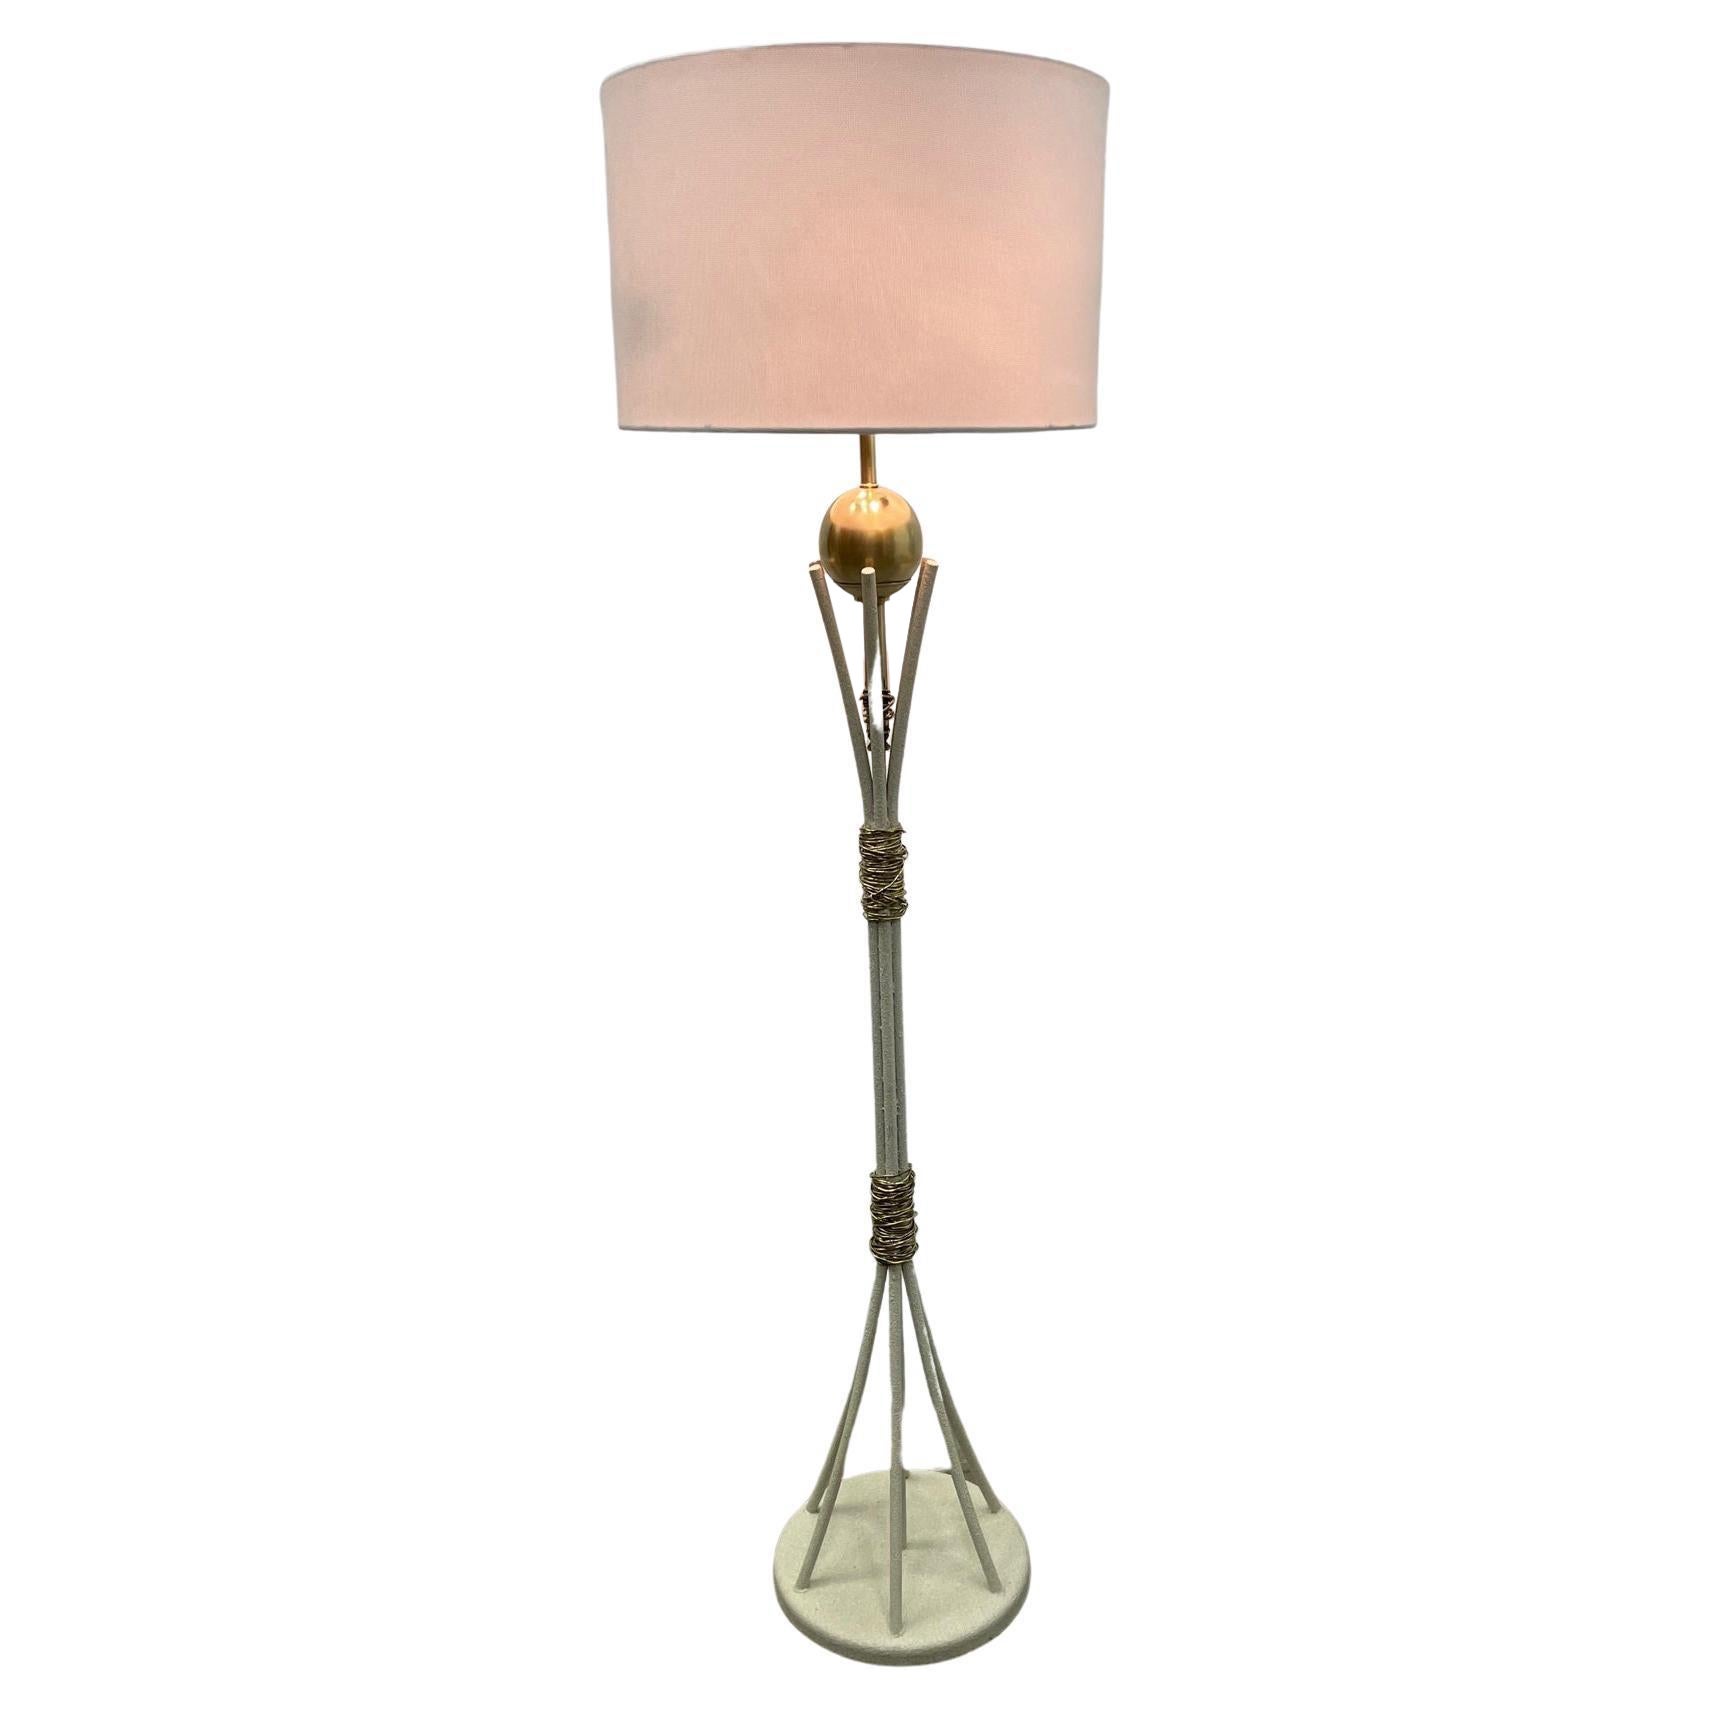 Stylish Mid Century Painted Cream Modern Floor Lamp with Brass Wire Decoration